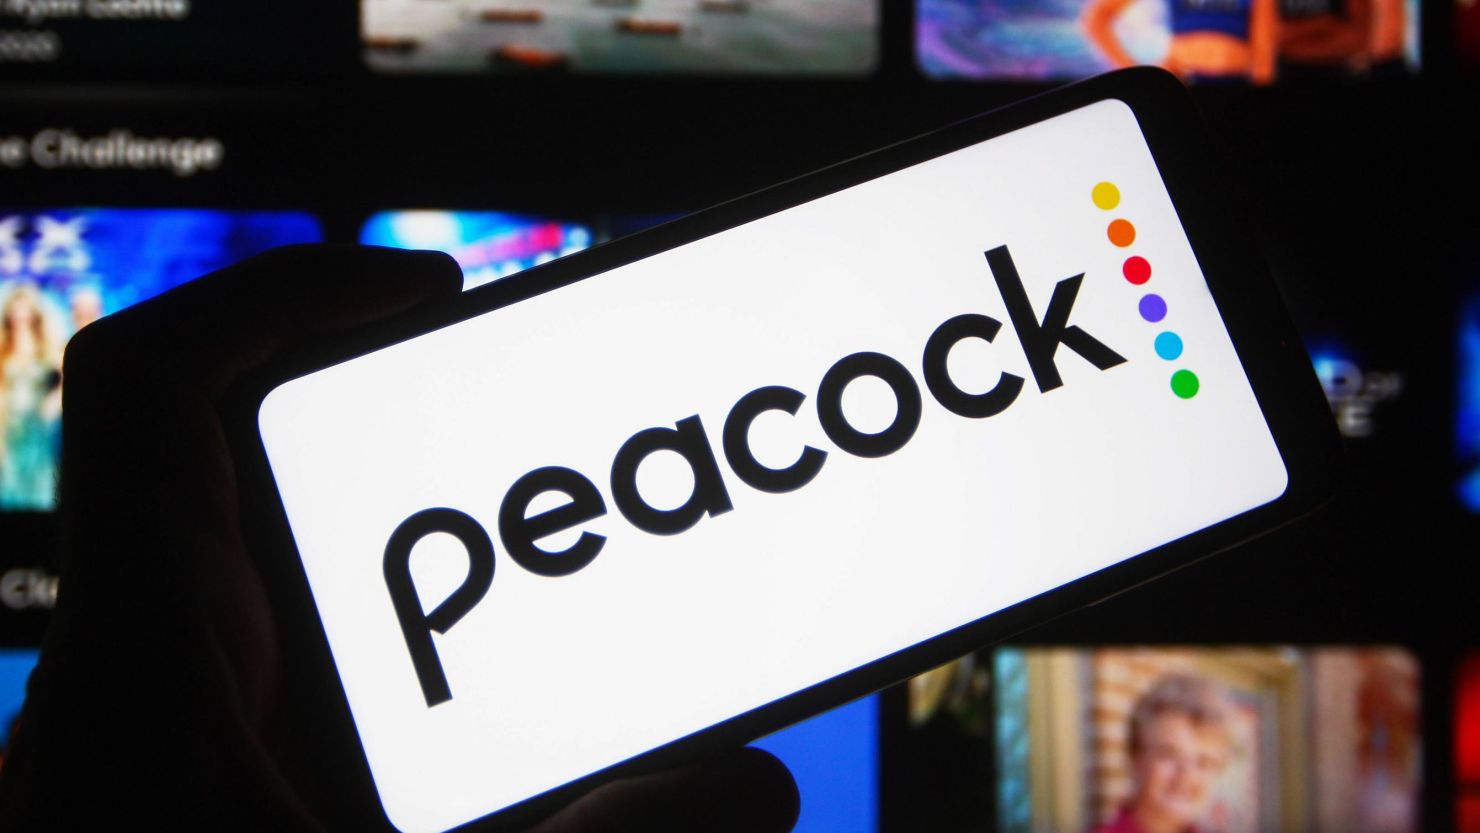 New Peacock Subscription Rates Set to Rise as Summer Olympics Approach: What You Need to Know